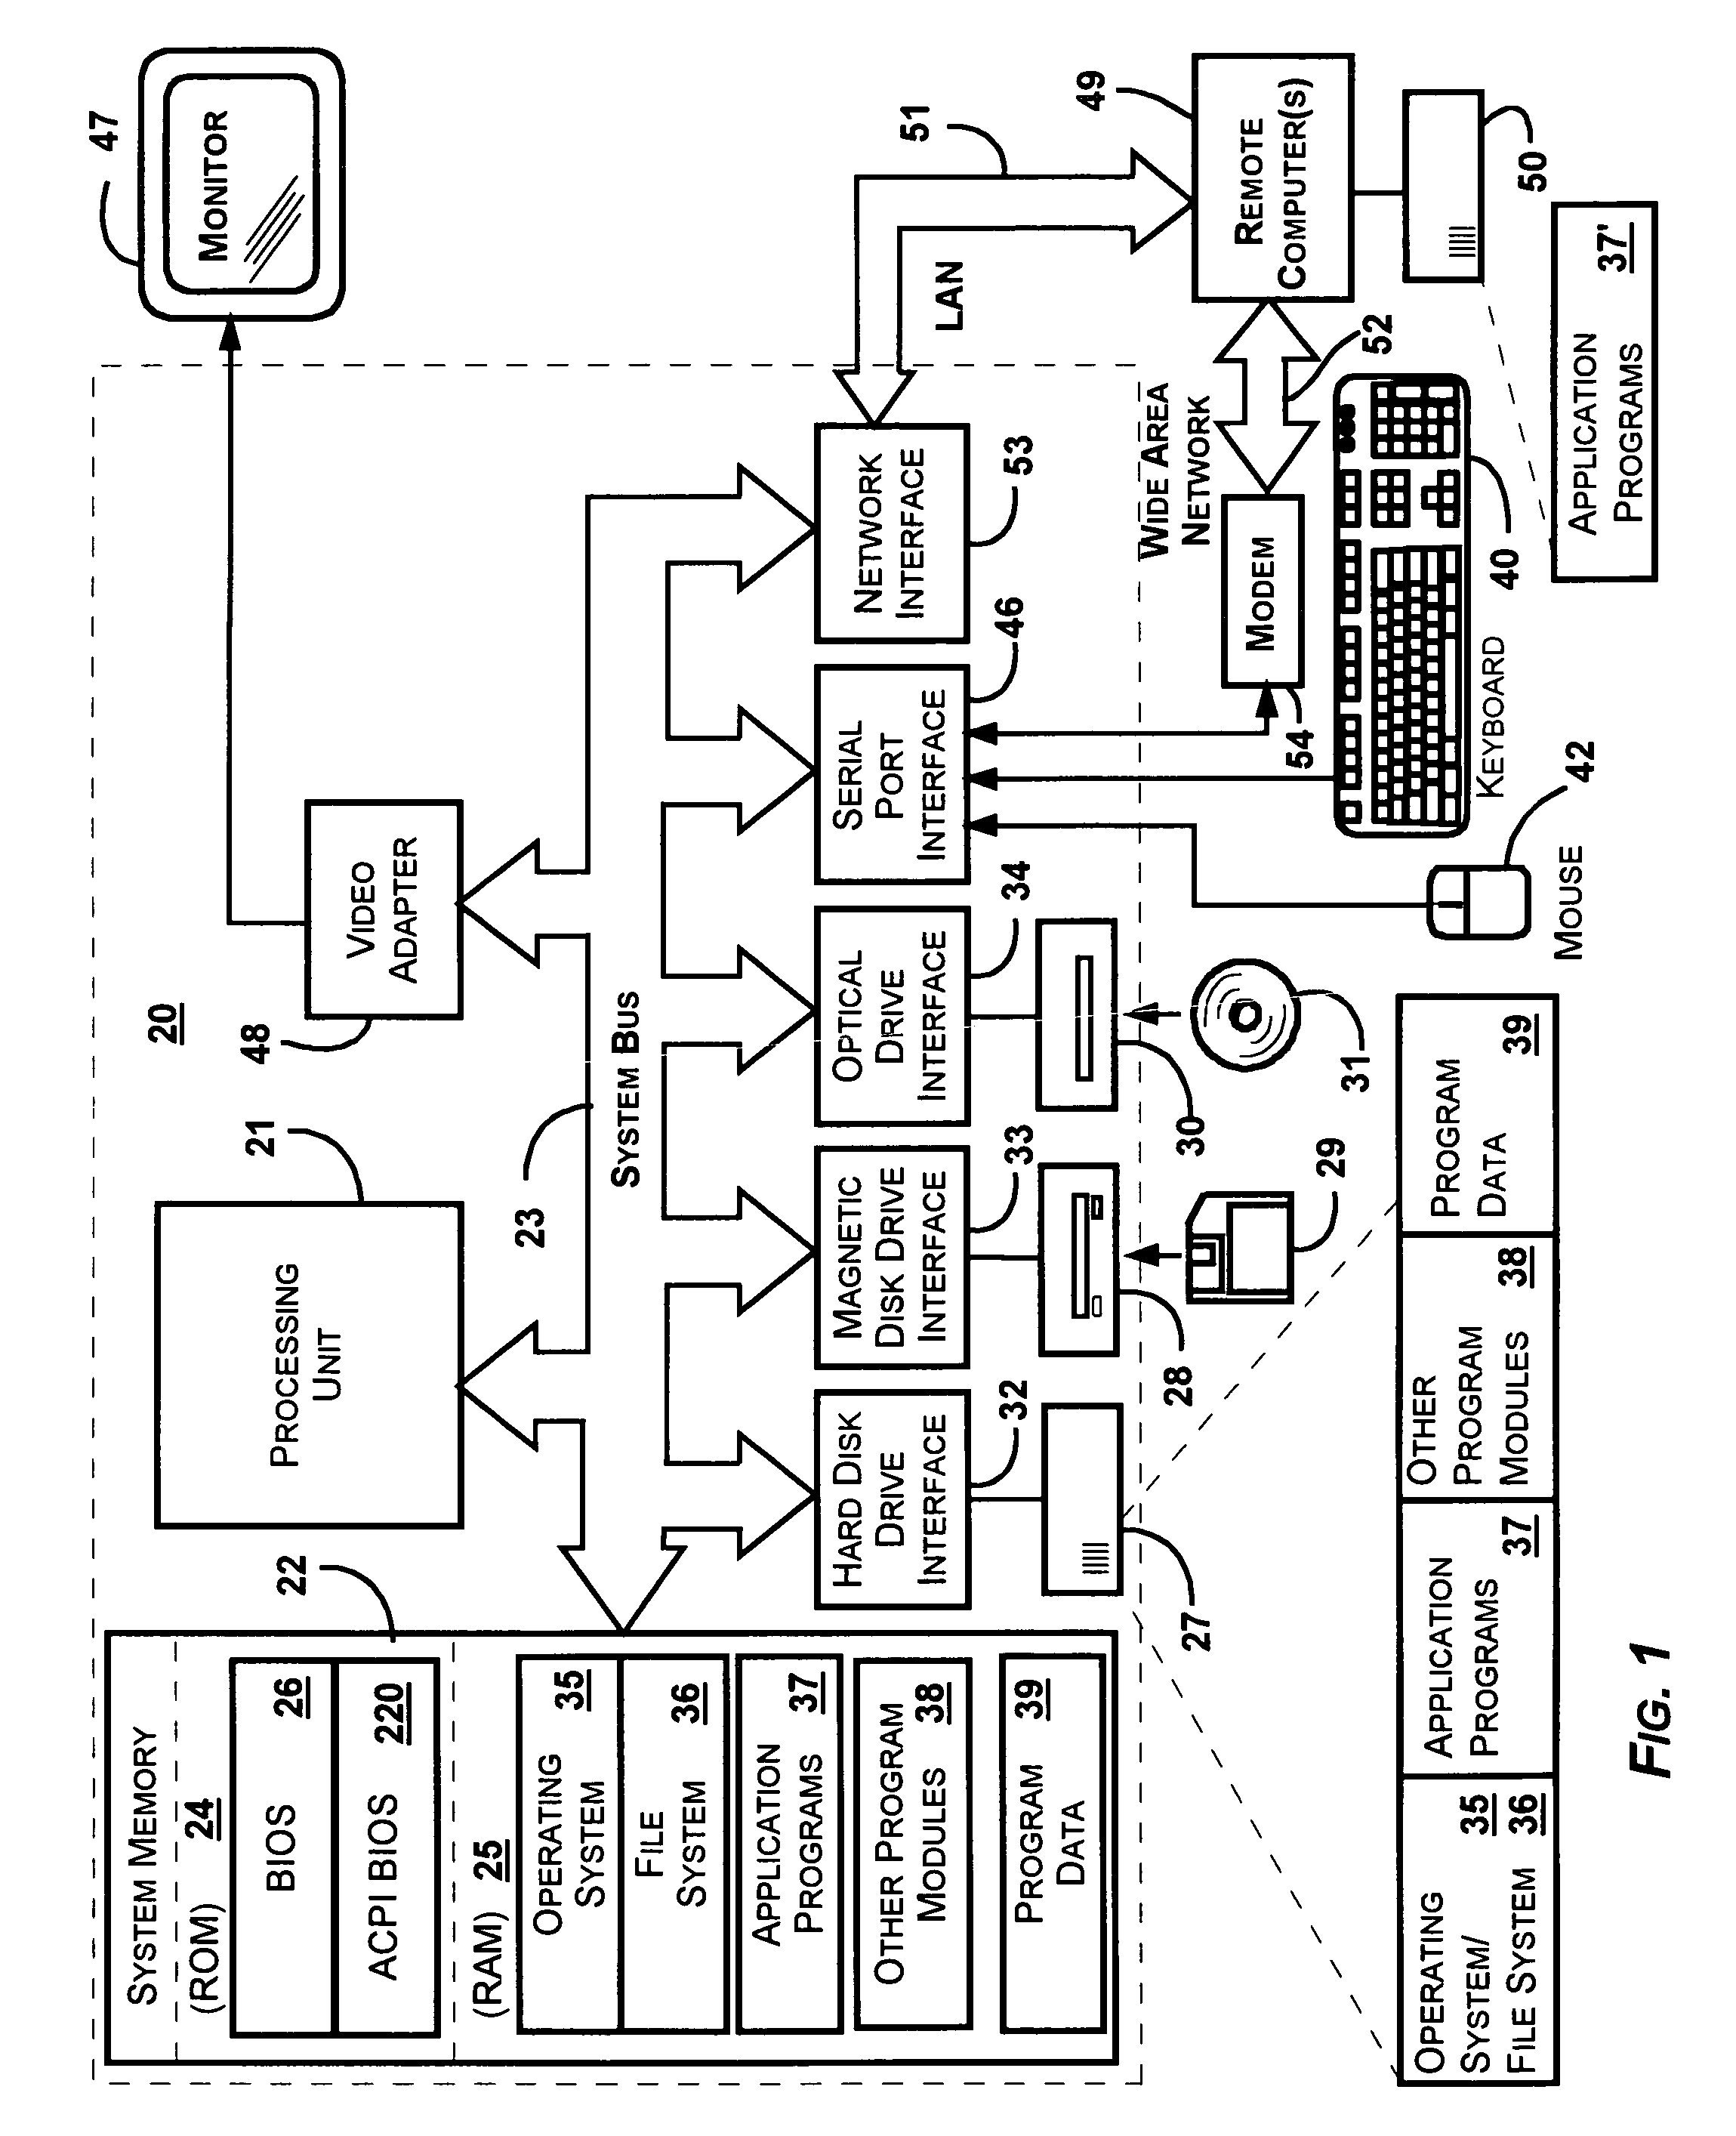 System and method for simulating hardware components in a configuration and power management system